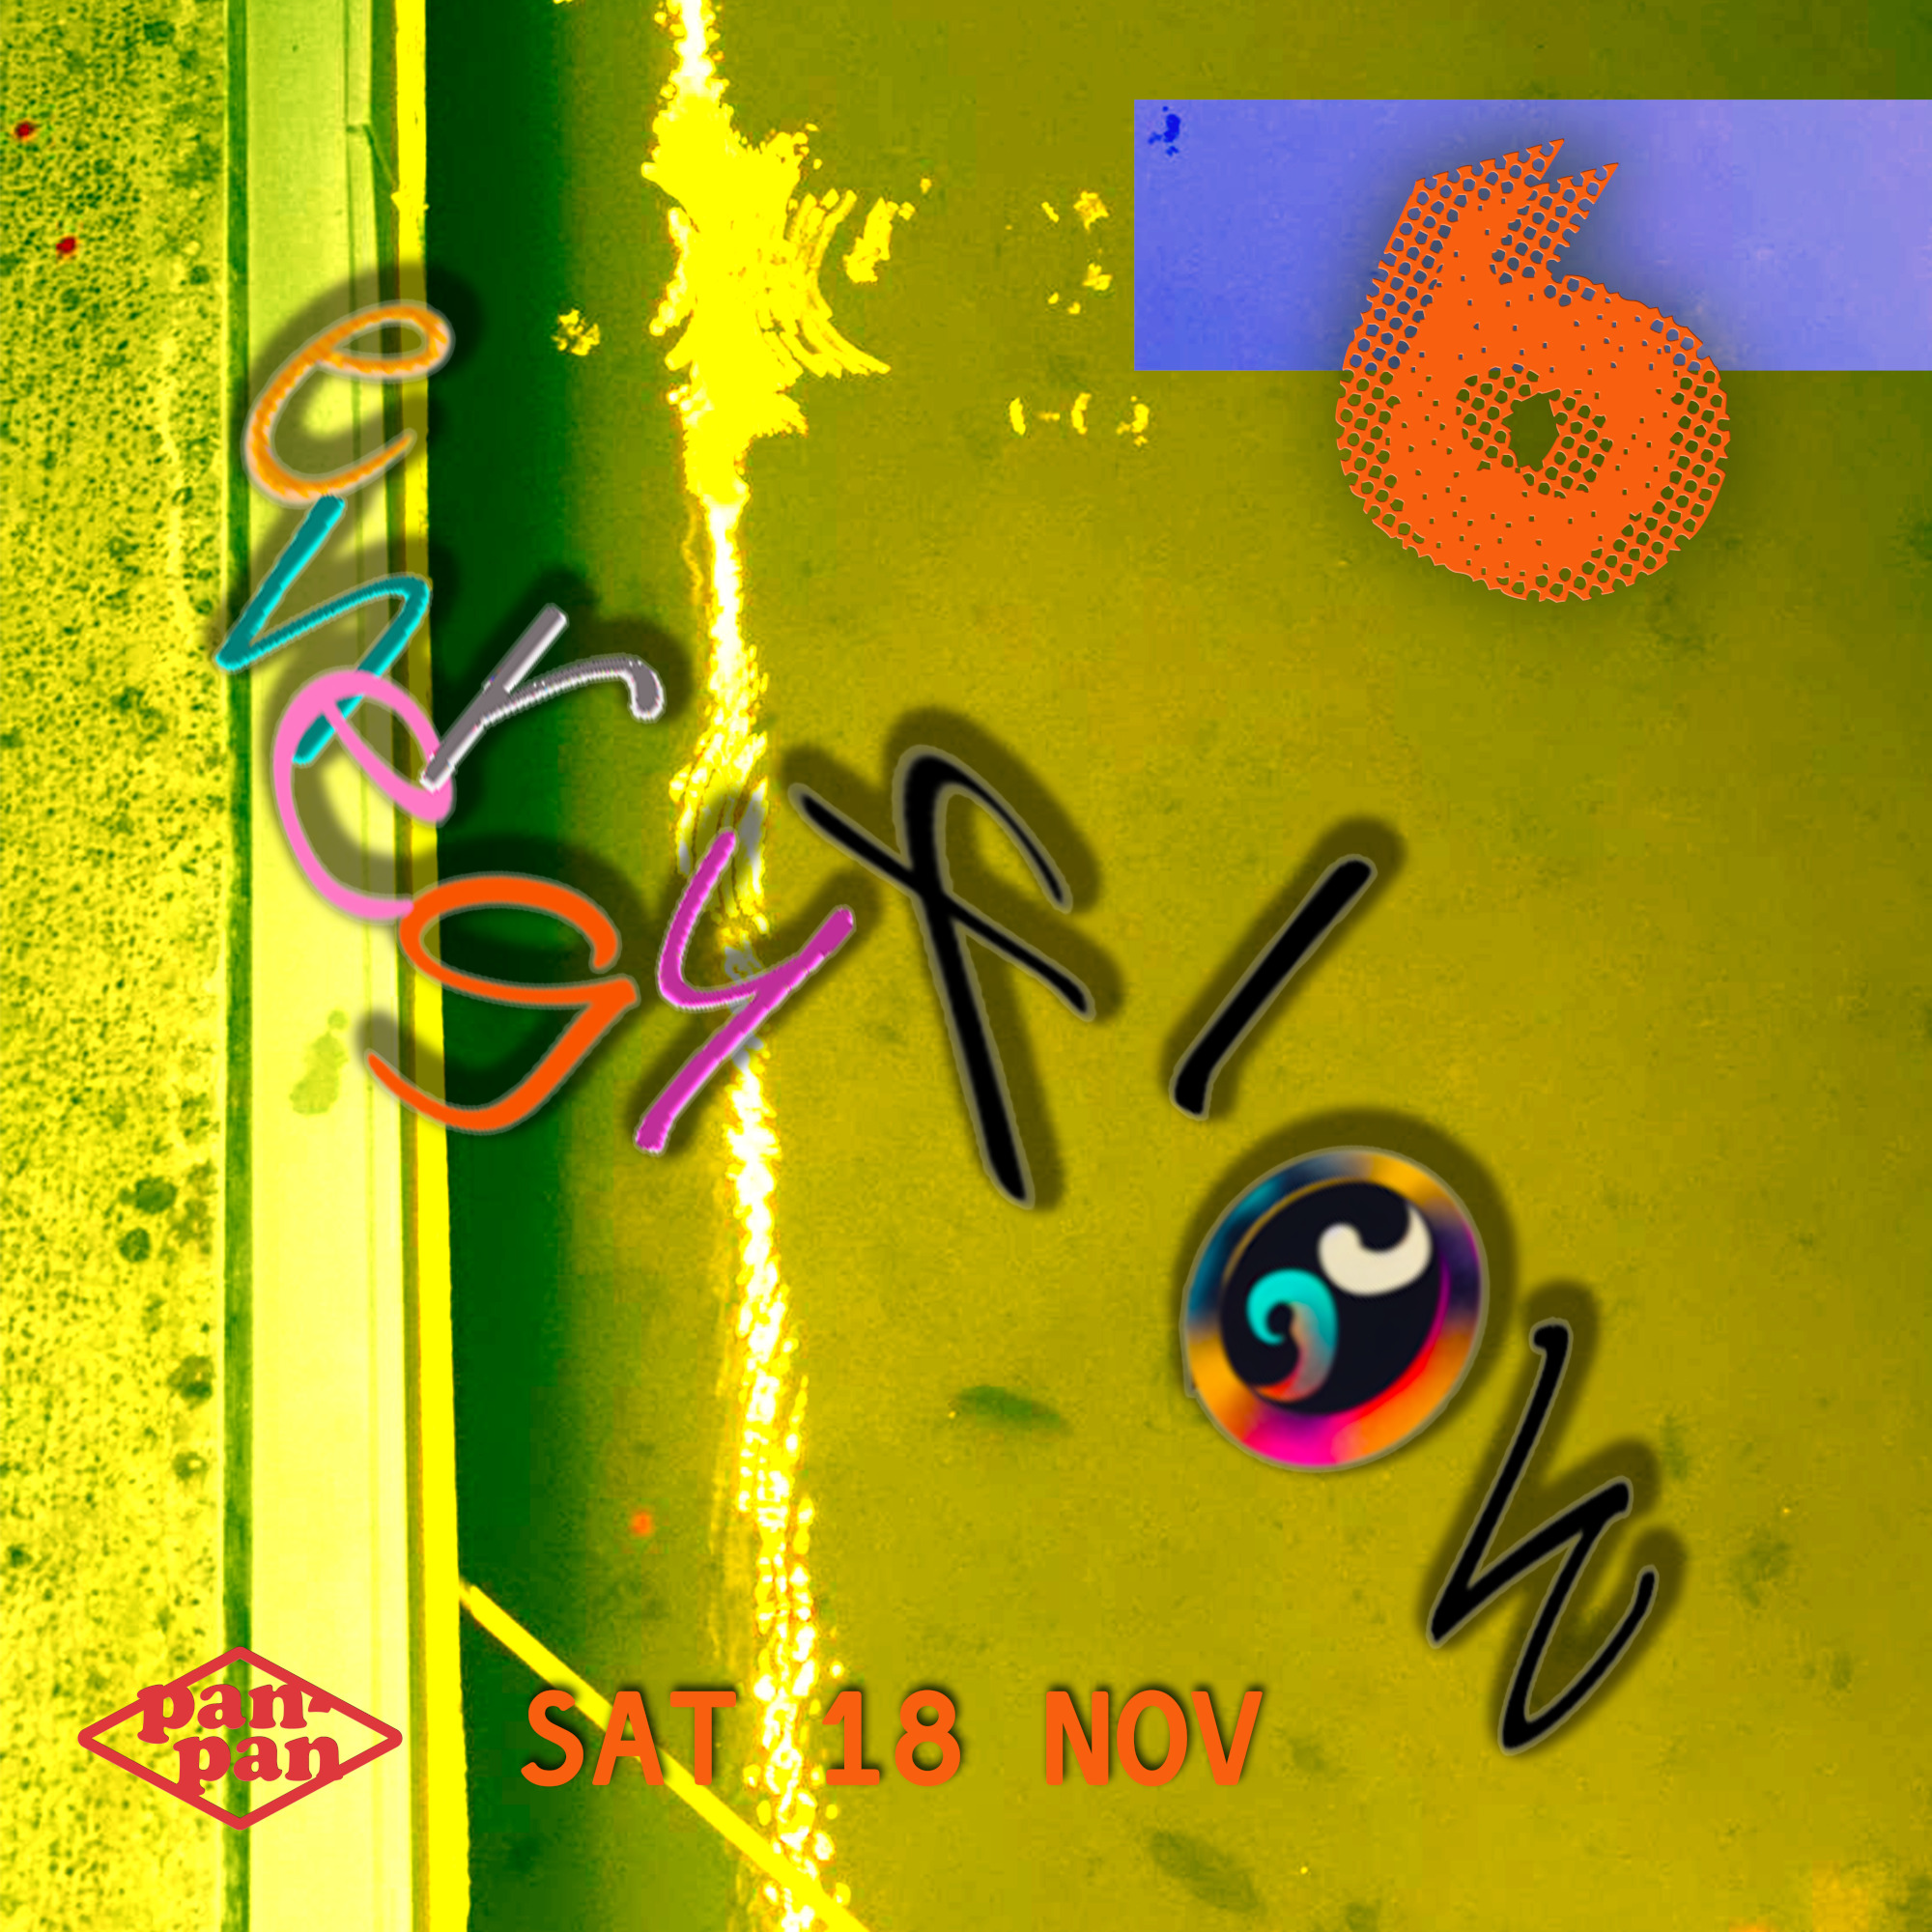 Yellow light refraction in background, text reads: number 6, energy flow, Sat 18th November, Pan Pan.